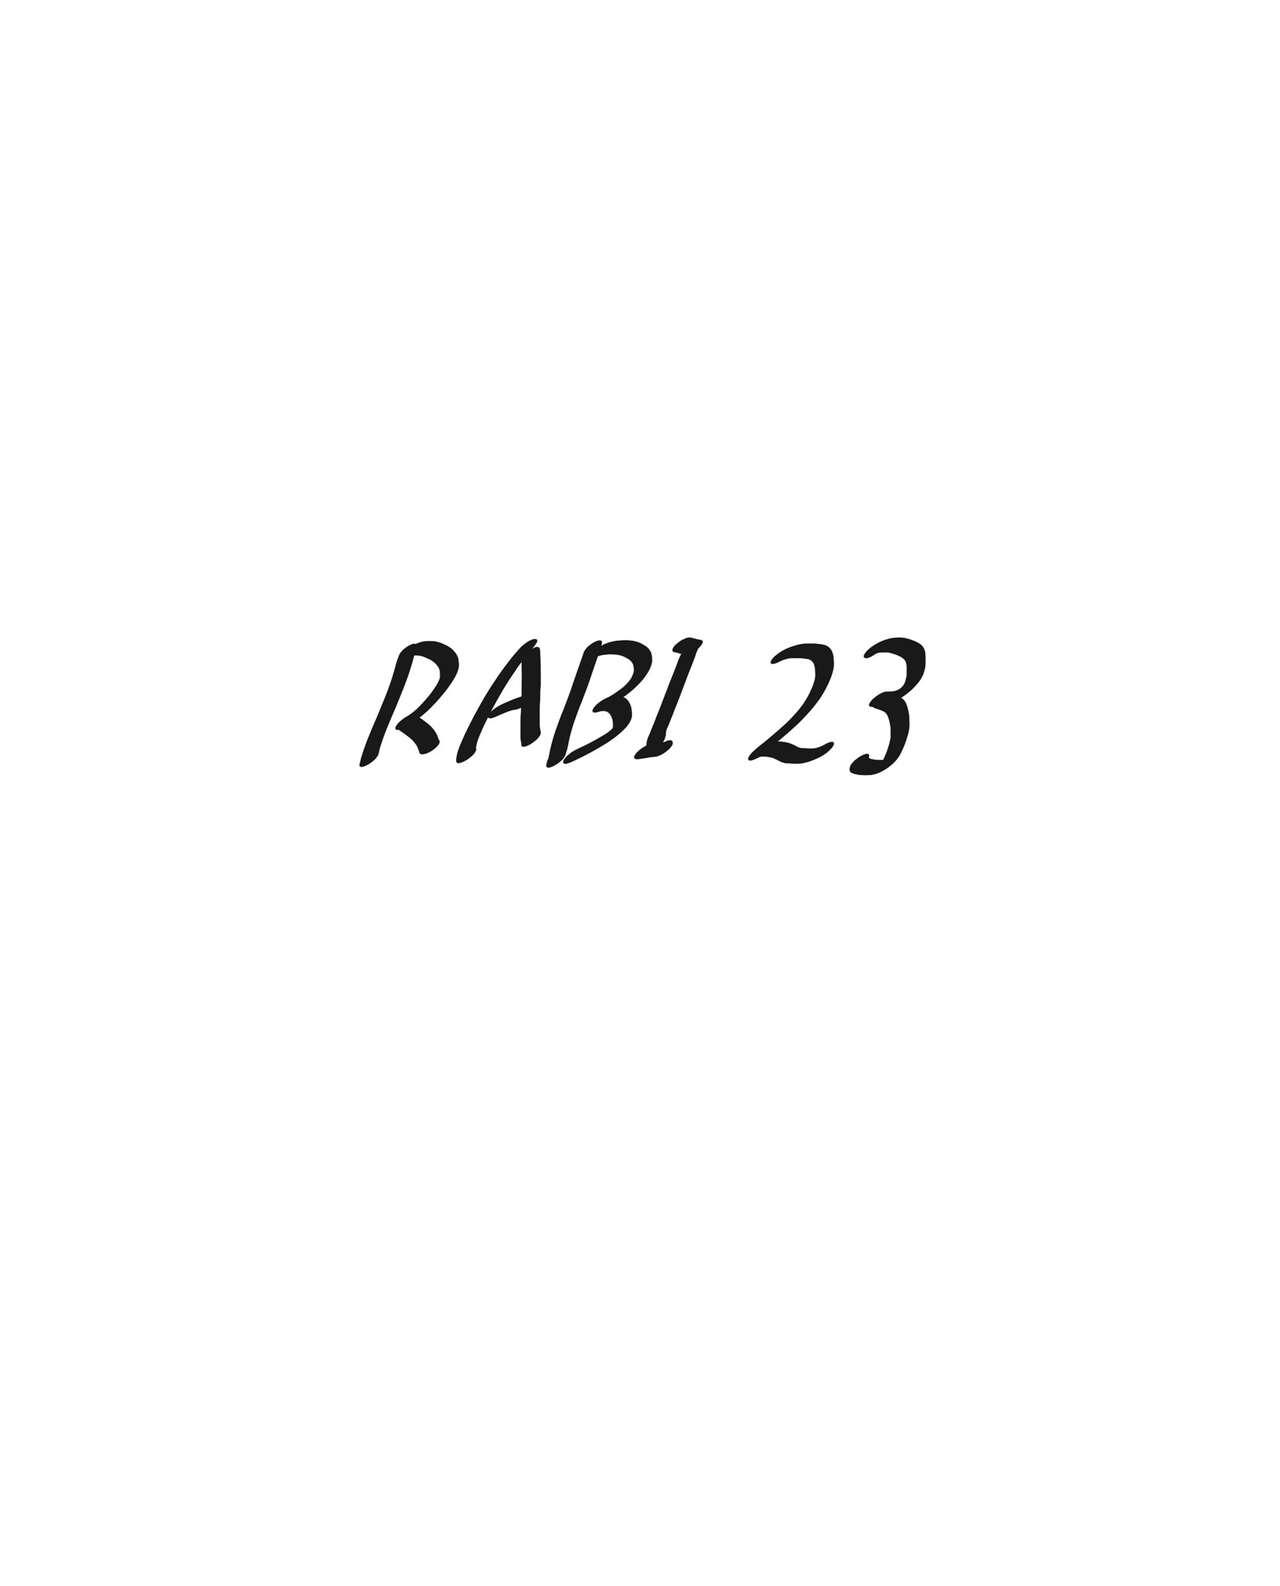 New rabi23 New - Picture 2